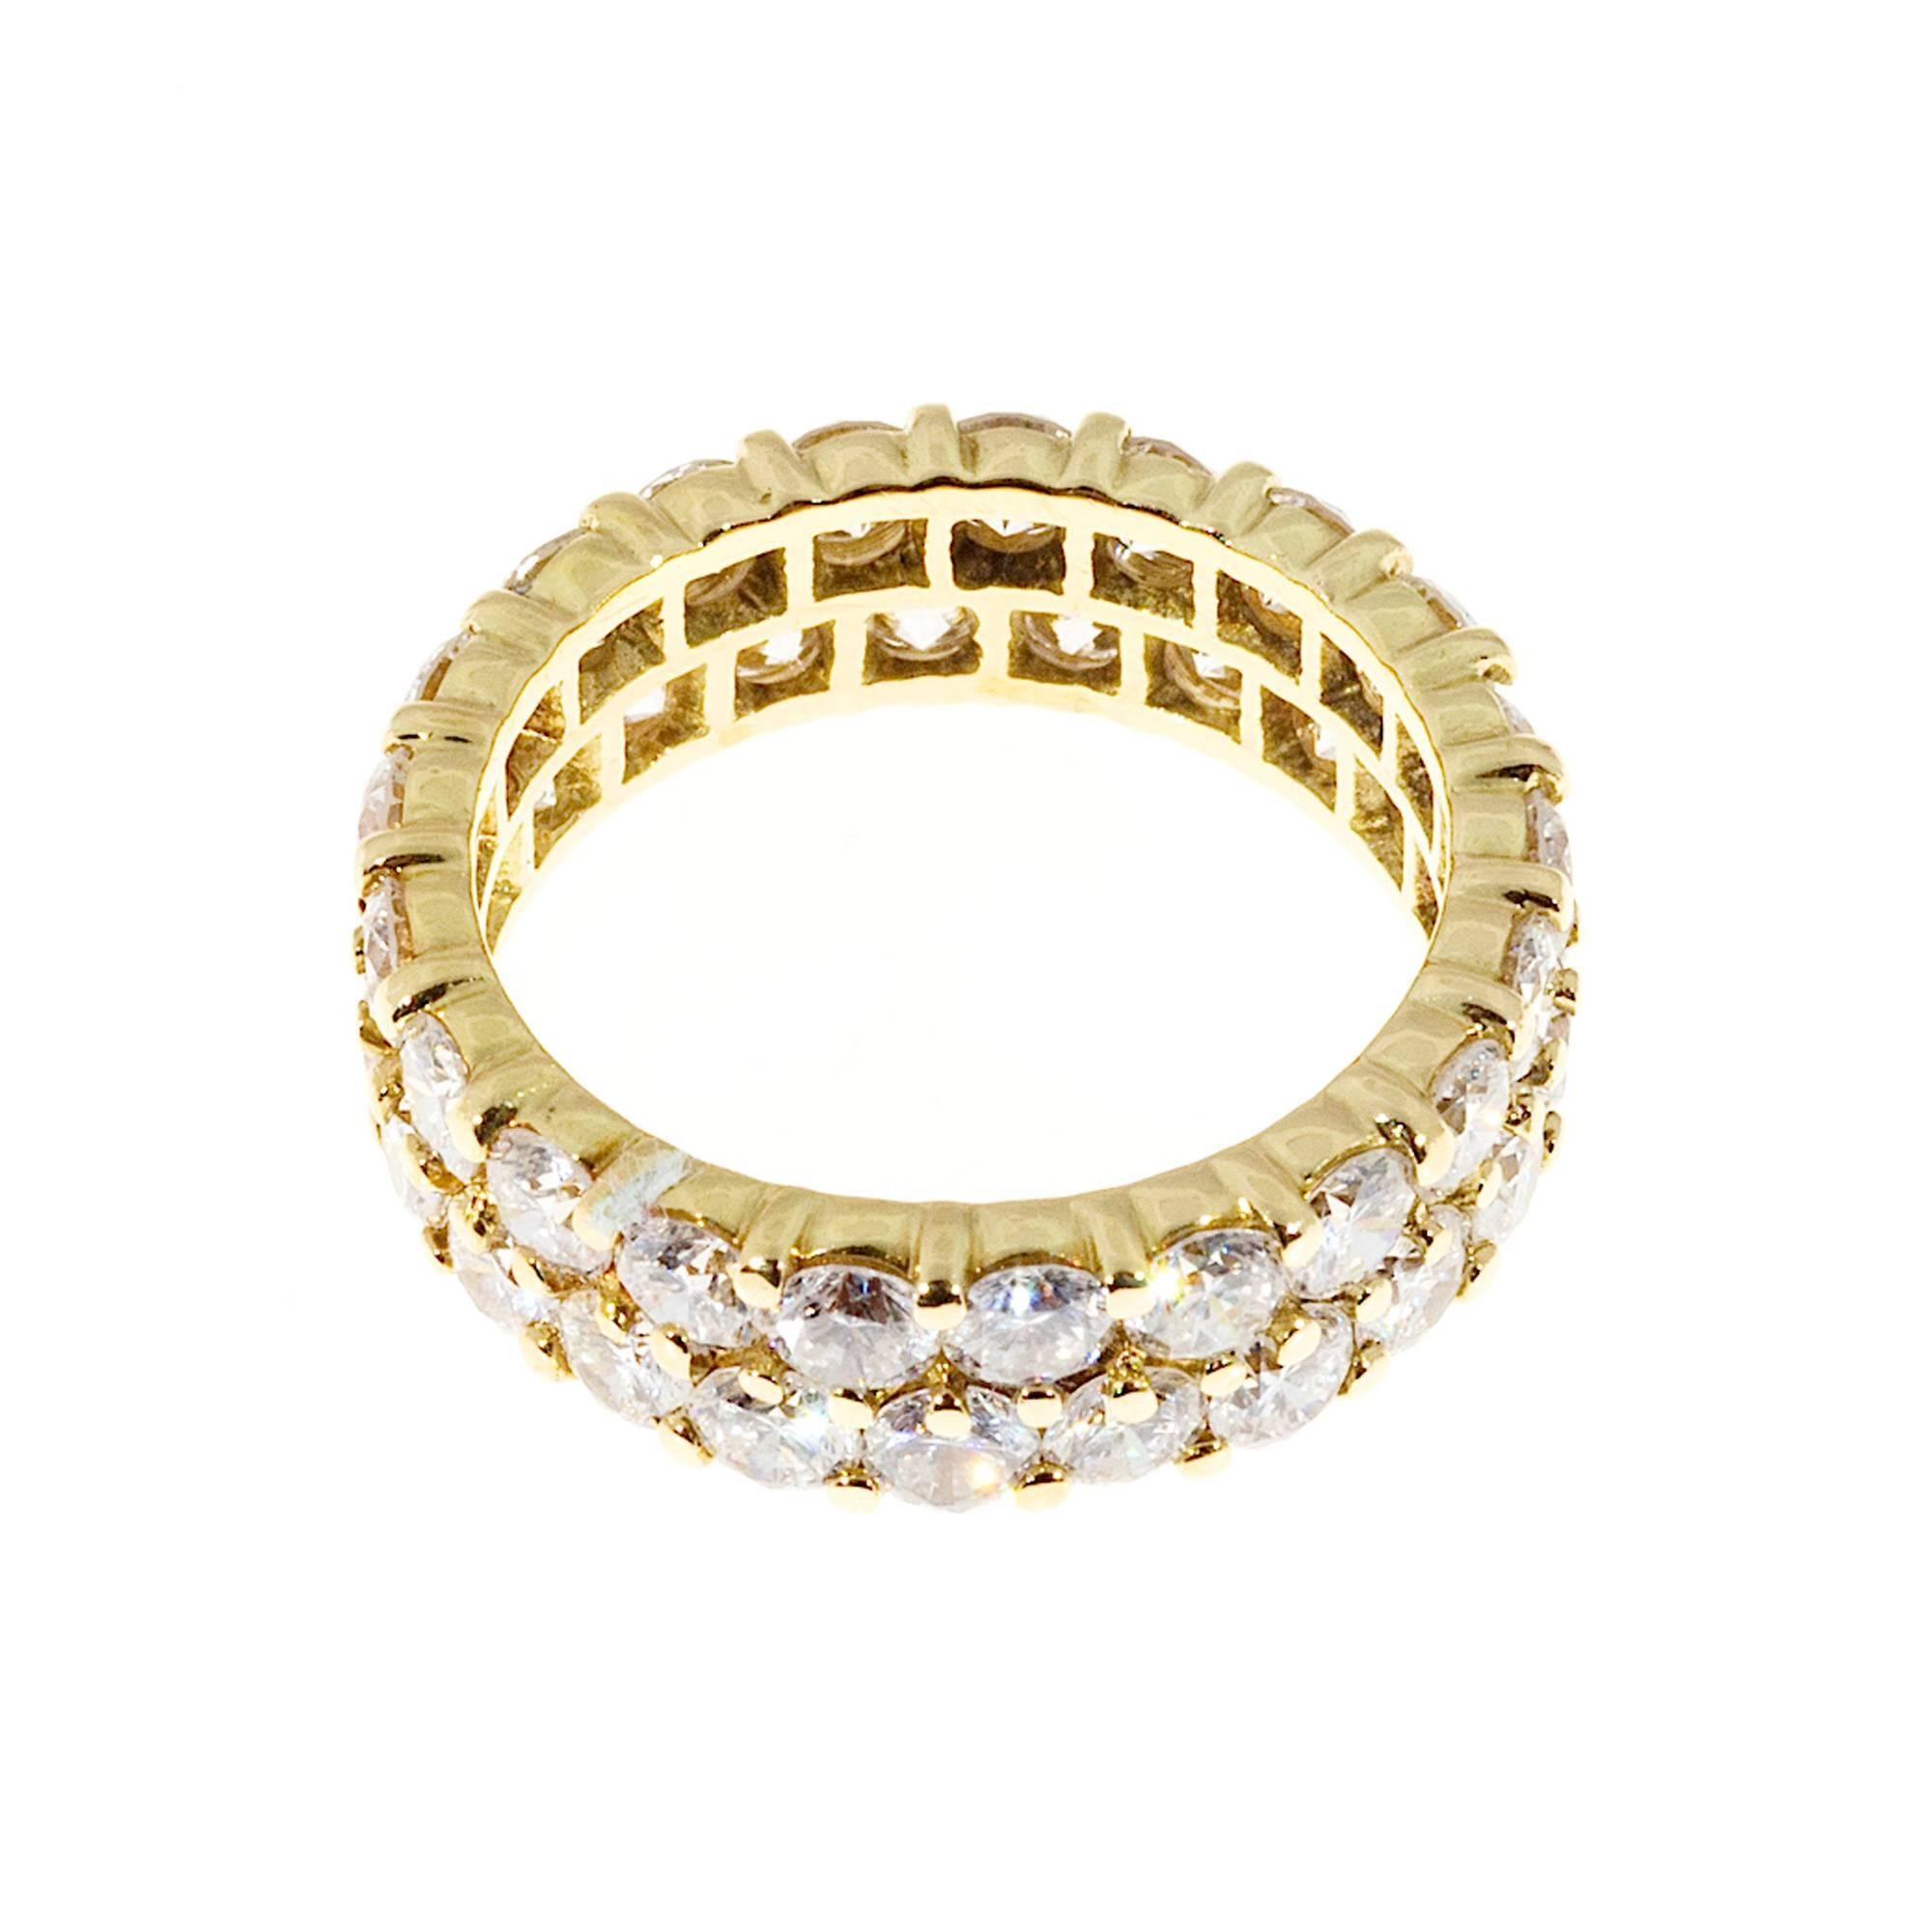  Hammerman Brothers 18k yellow gold 2 row common prong F, VS Ideal cut eternity ring.

48 round Ideal full cut diamonds, approx. total weight 3.90cts, F, VS
18k Yellow Gold
Stamped: 18k HB 39
Width all around: 6.2mm
Height: 2.7mm
5.8